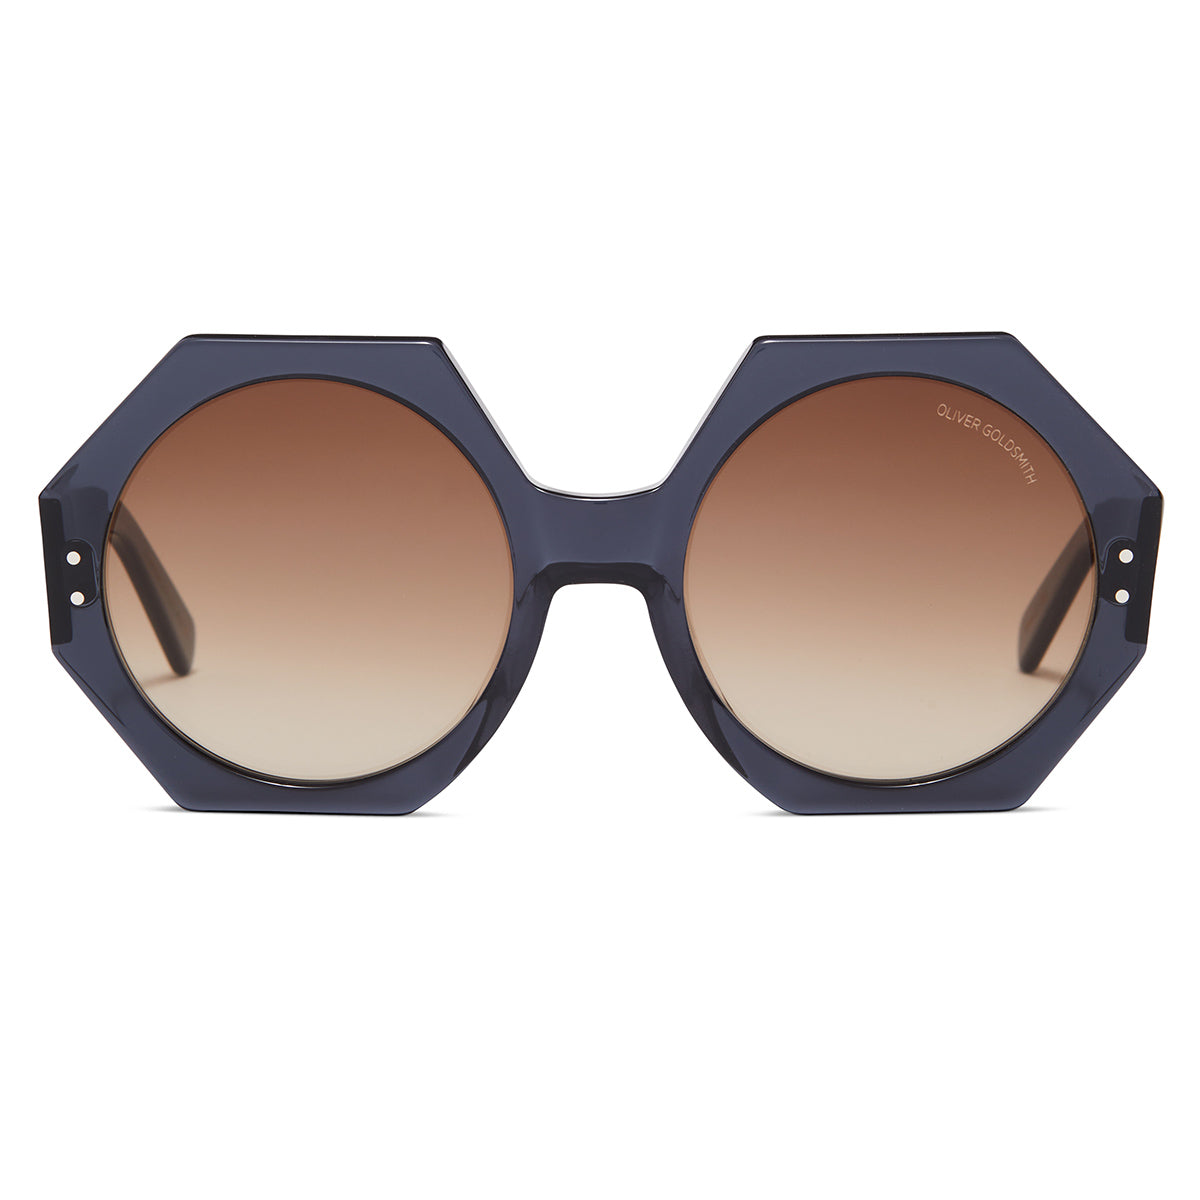 Hex Sunglasses with 10pm acetate frame